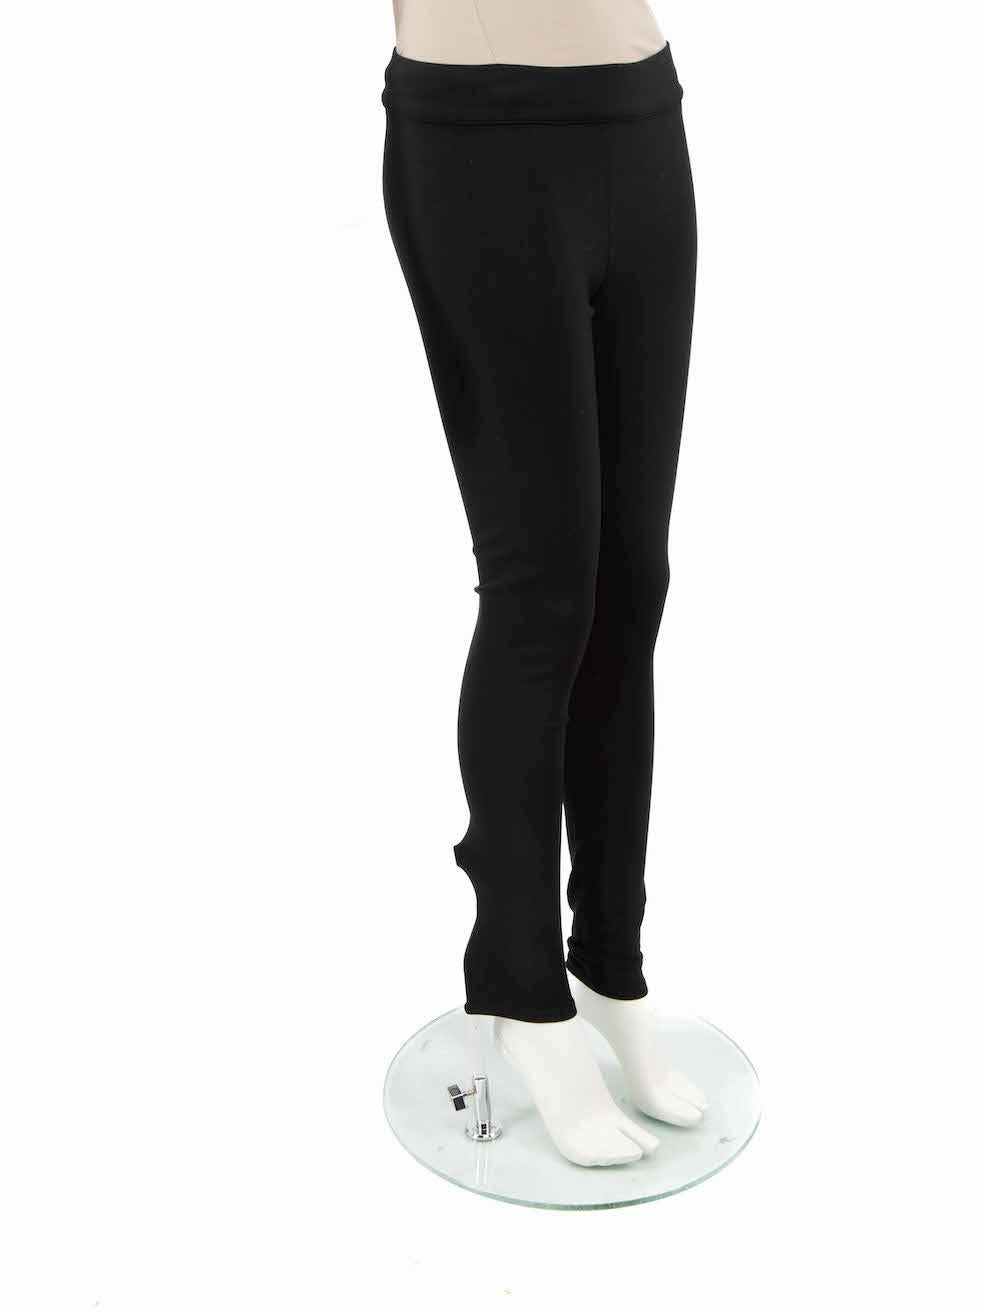 CONDITION is Good. Minor wear to leggings is evident. Light wear to the seams at the back of the legs where some of the stitching has been unplucked on this used The Row designer resale item.
 
 Details
 Black
 Synthetic
 Leggings
 High rise
